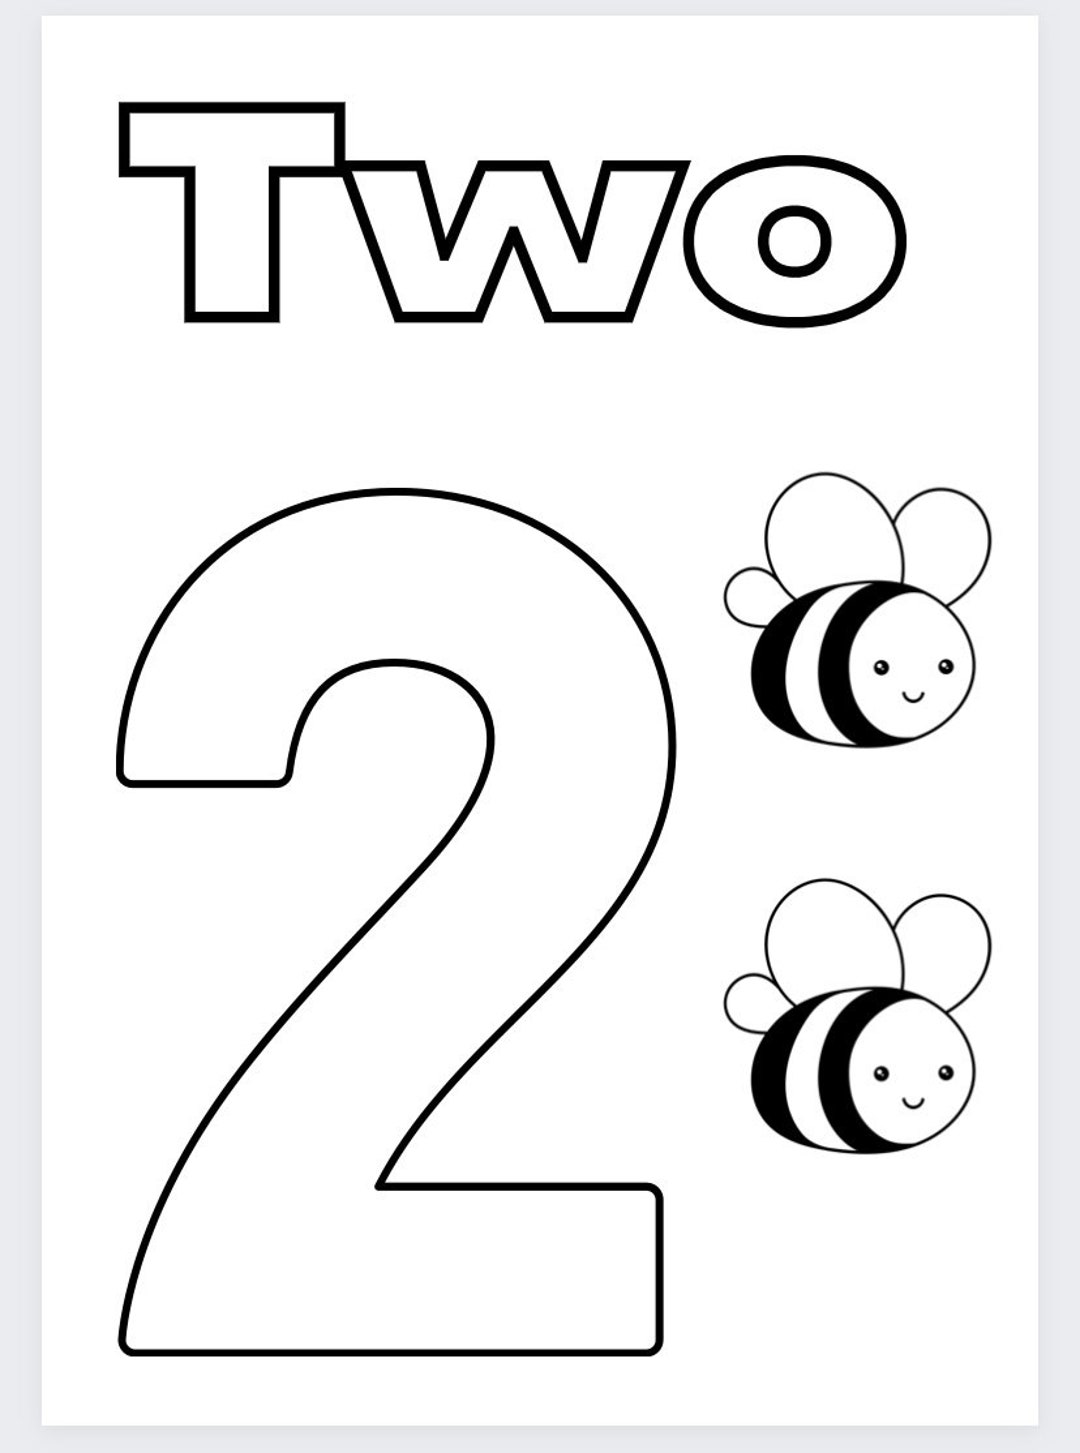 1-10 Learning Numbers Coloring Pages - Etsy